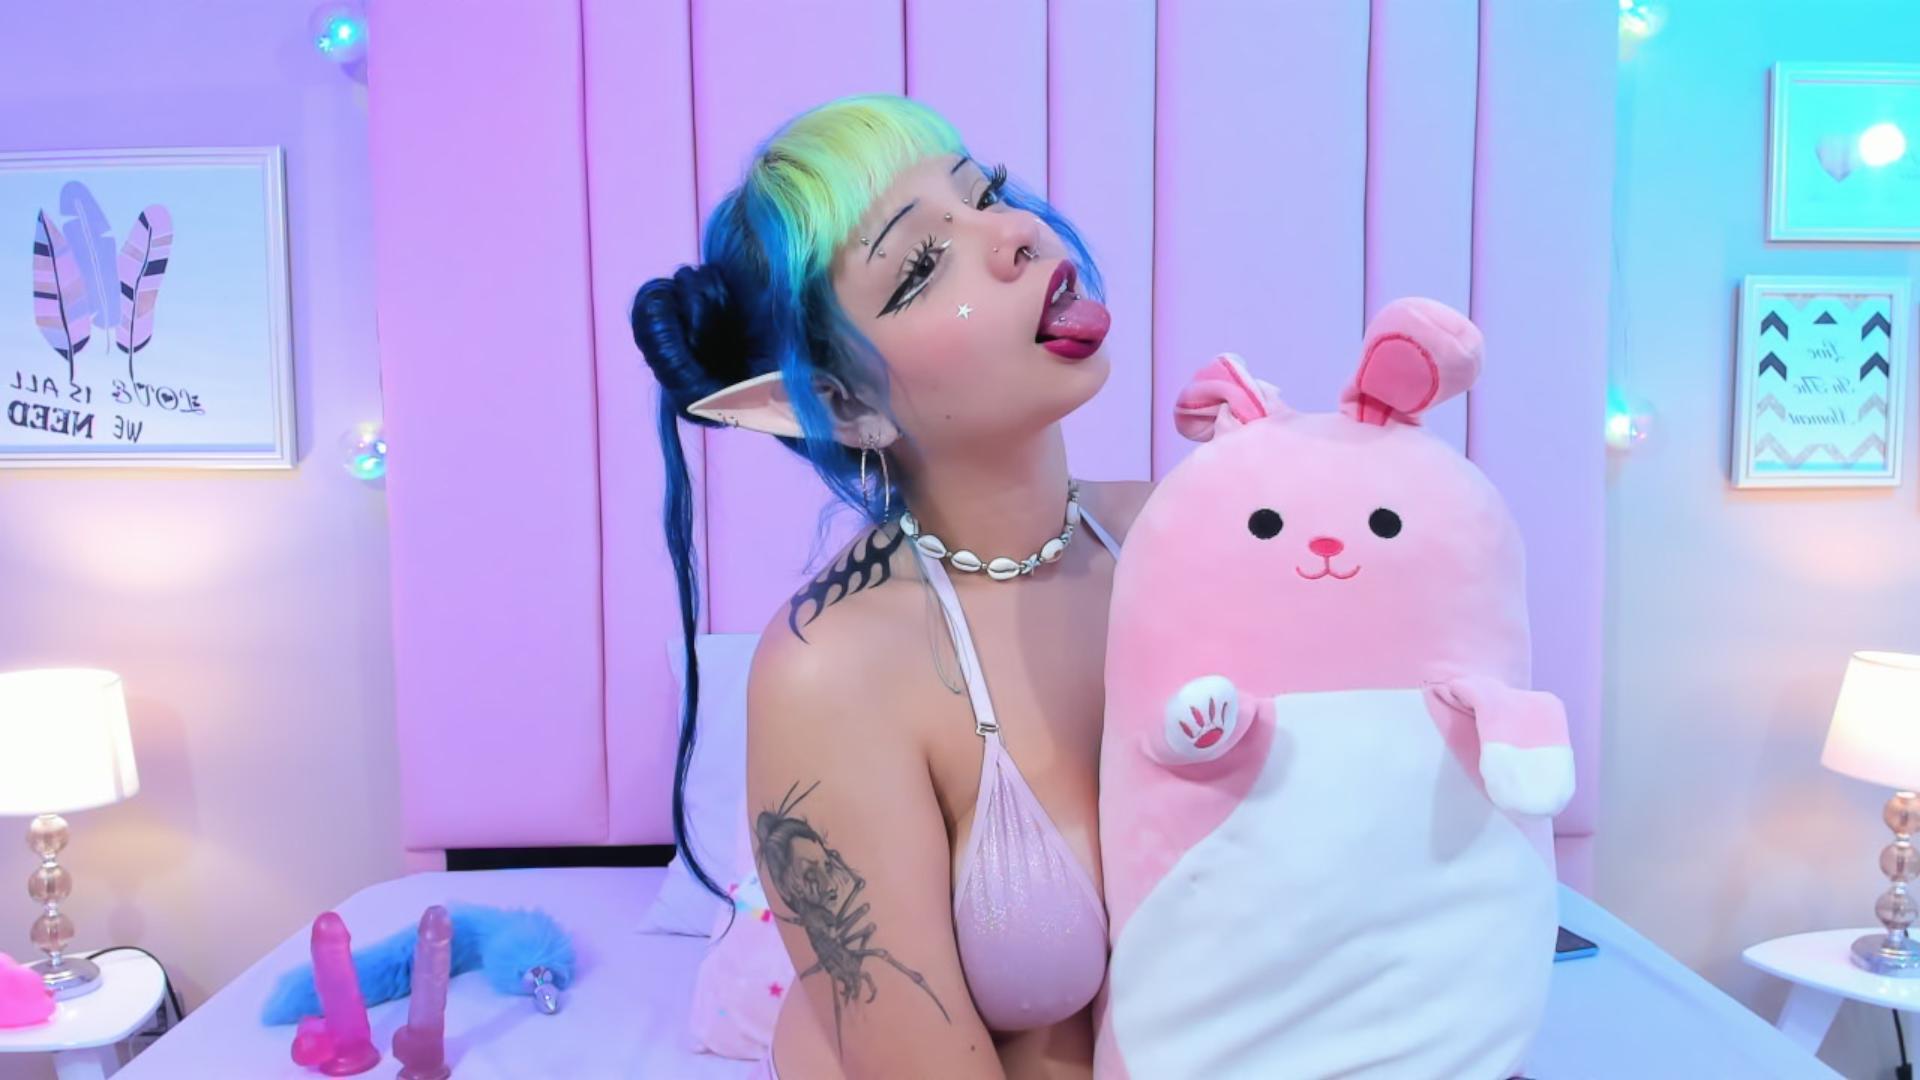 Young cosplay girl with tattoos and elf ears loves to stream for her fans and gets naked for them delighting her audience with her sexy boobs and big teen ass ready to get pounded and cummed on with intense Lush vibes. She pulls out her tongue letting her hot saliva drool on her neck and saggy boobs